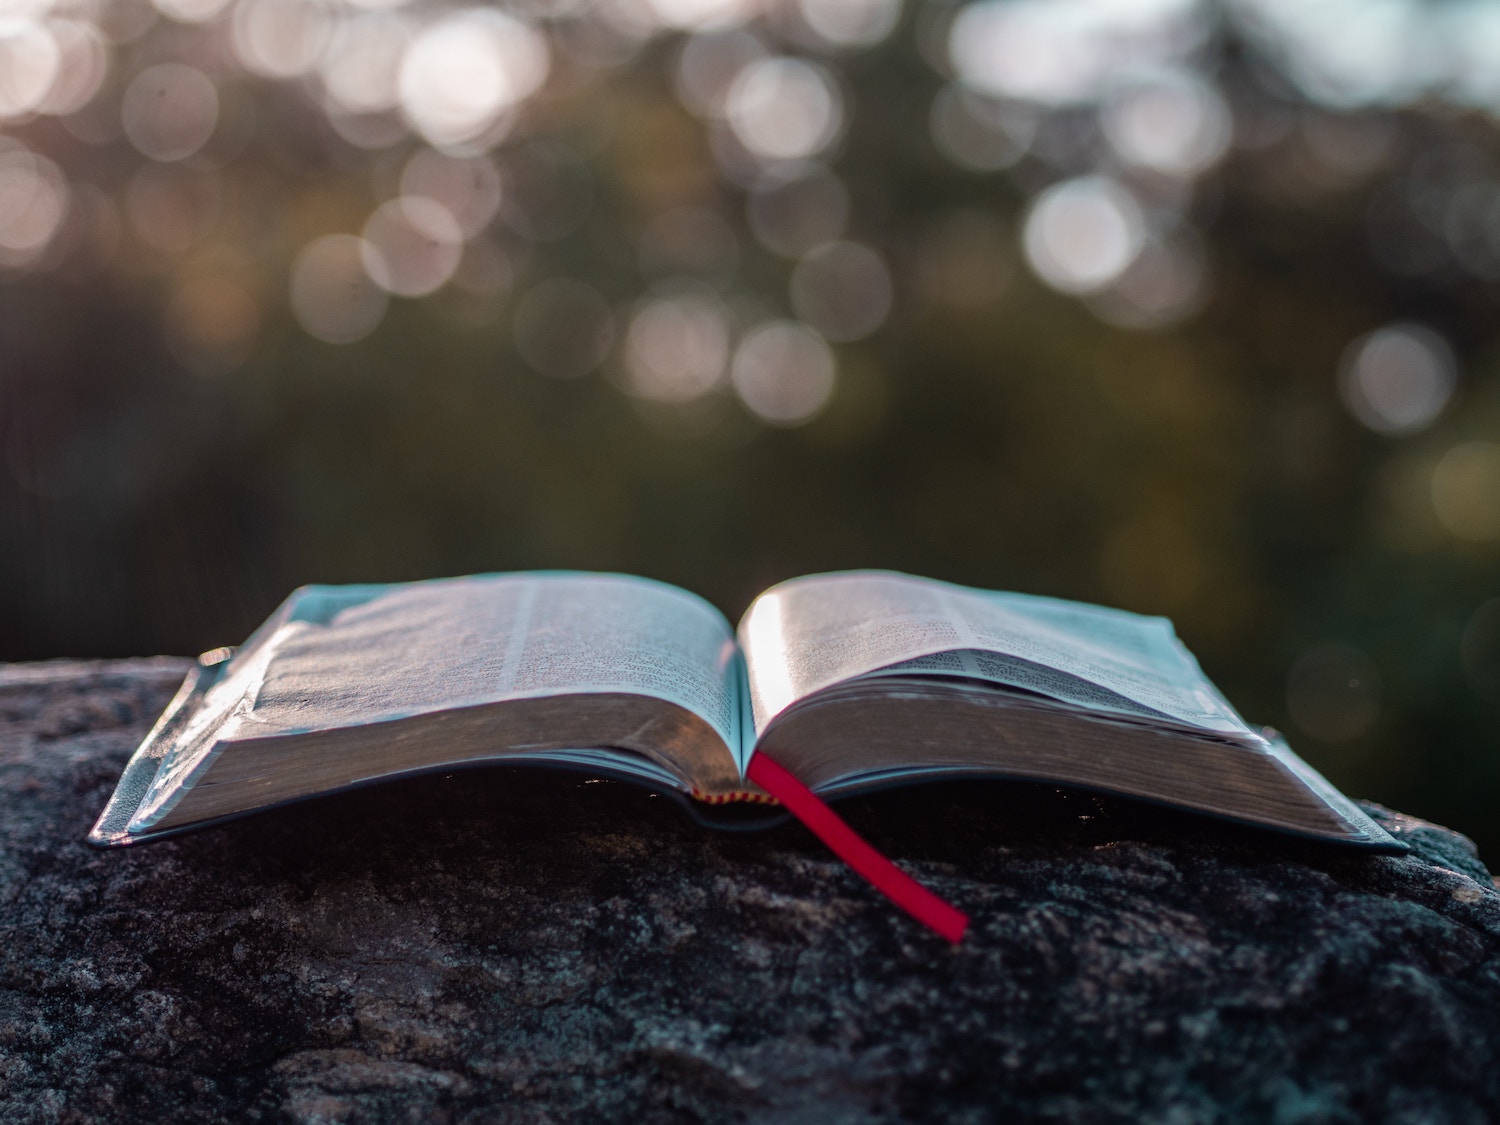 The Bible, Wisdom, and Our Sacred Responsibility